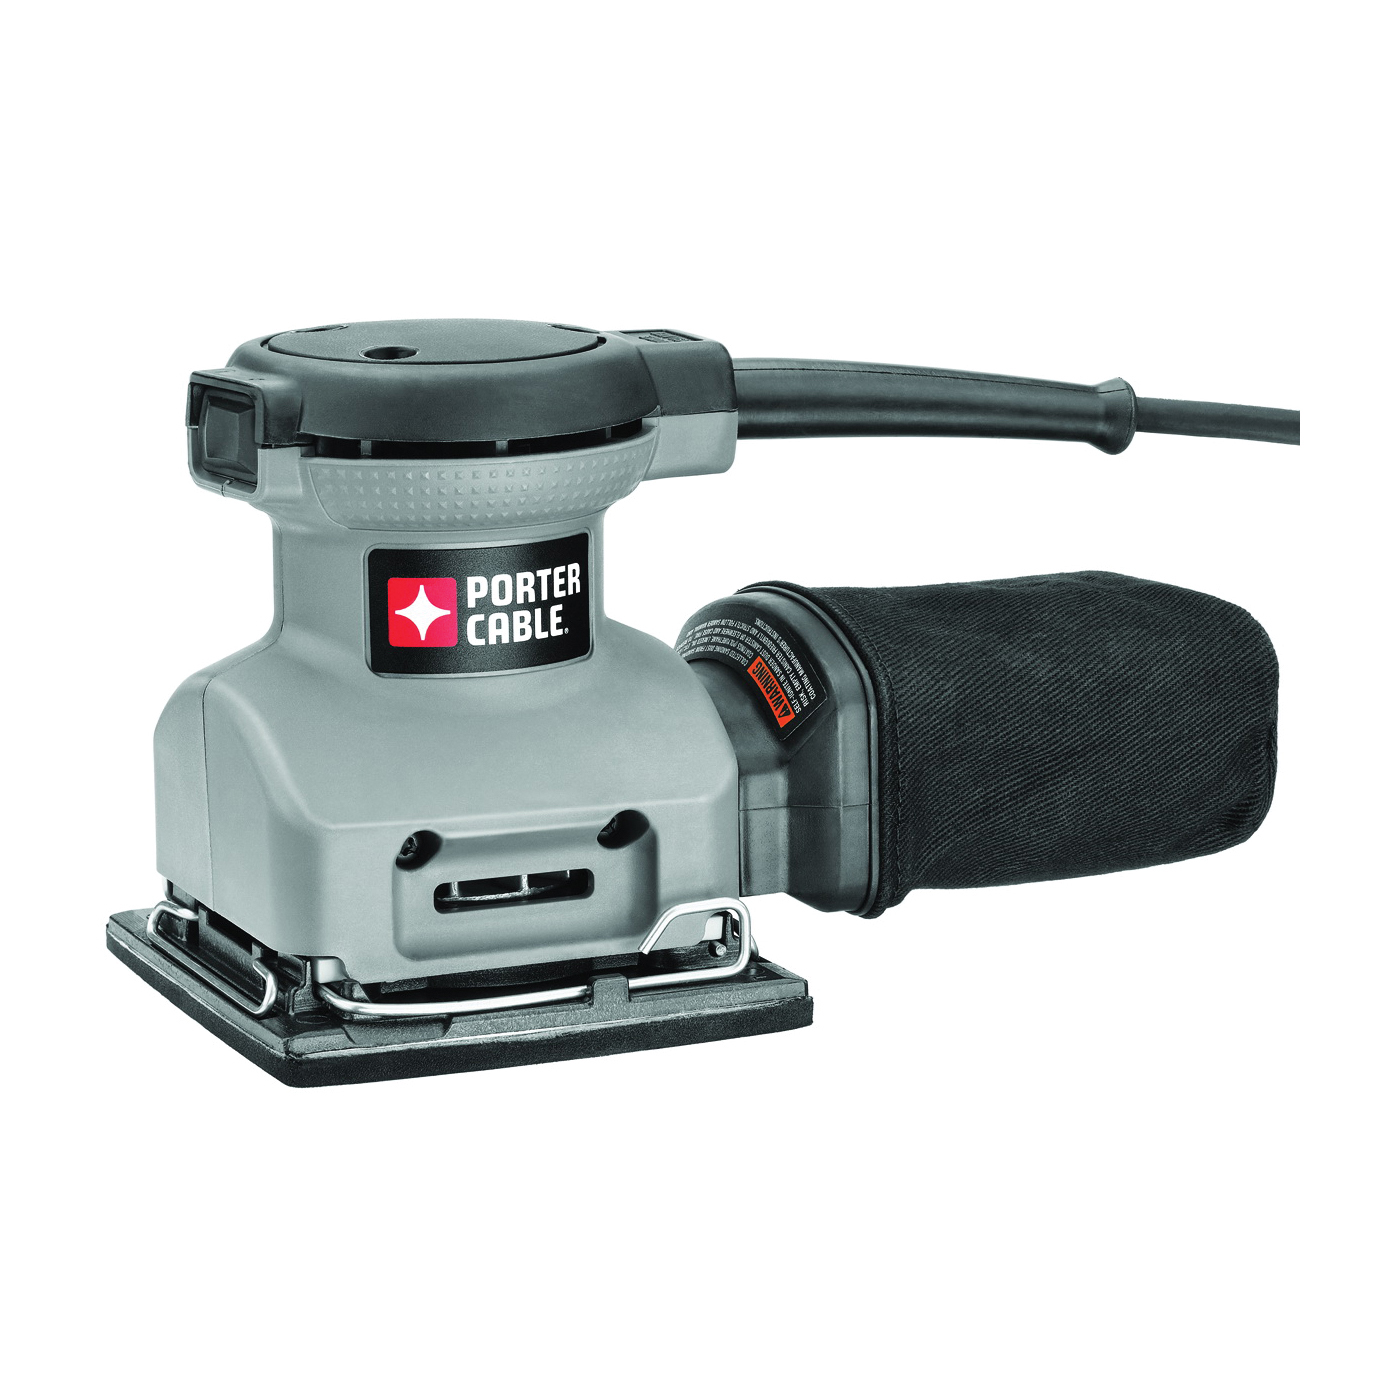 380 Orbit Finishing Sander, 2 A, 4-1/4 x 4-1/2 in Pad/Disc, Includes: Sander, Paper Punch